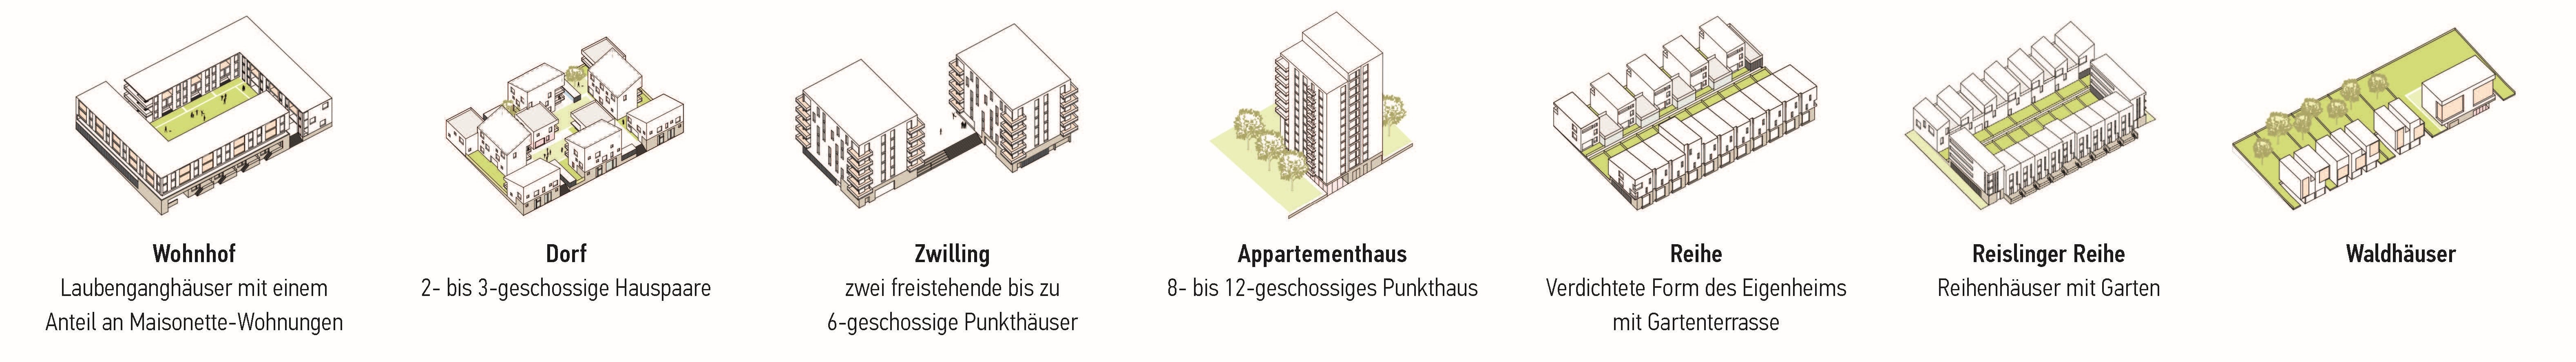 Representation of the housing types from left to right "Wohnhof", "Dorf", "Zwilling", "Appartementhaus", "Reihe", "Reislinger Reihe" and "Waldhäuser"